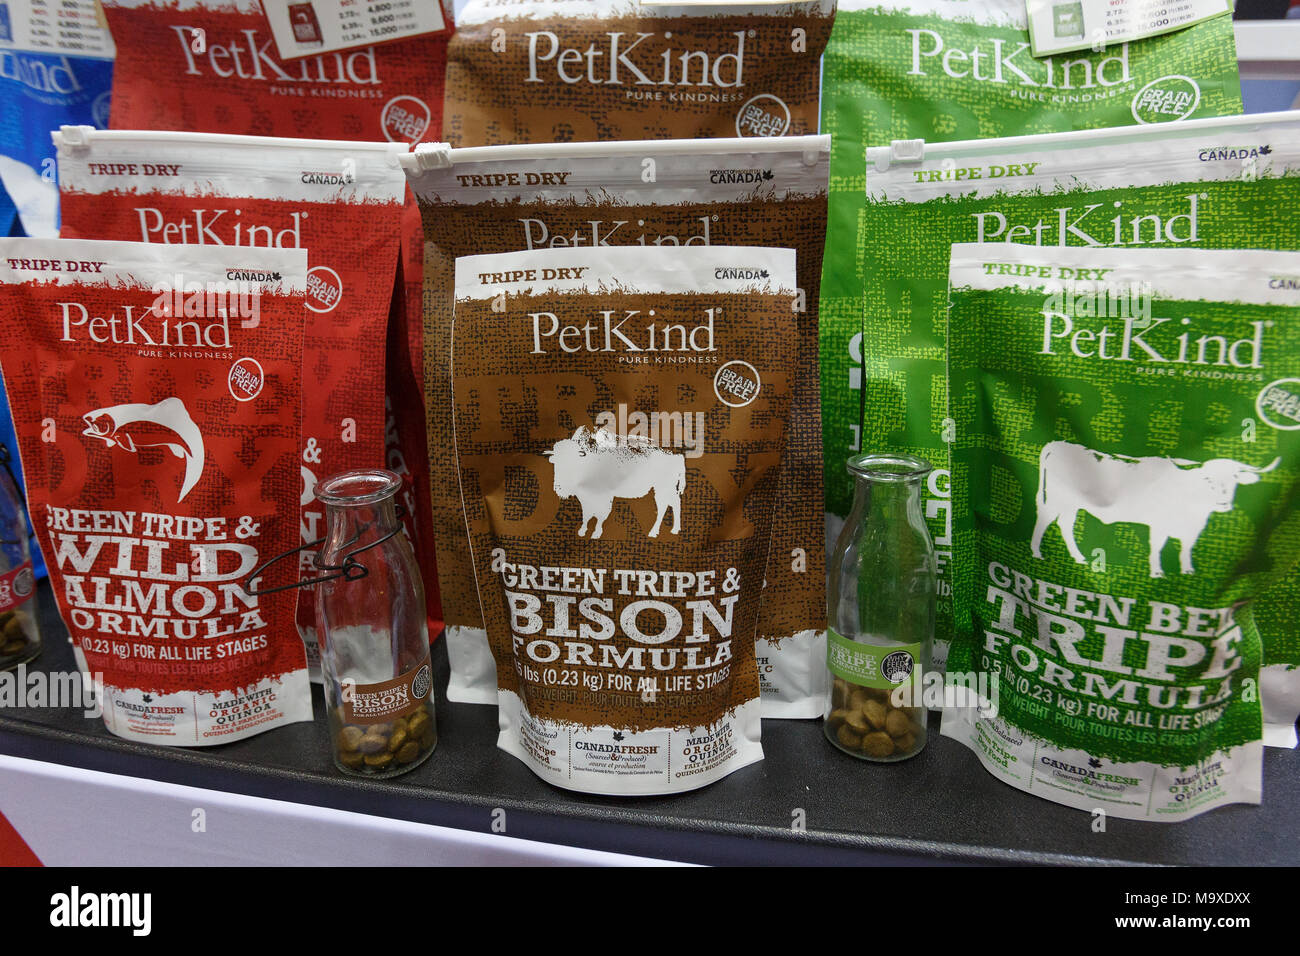 Food for pets on display at Interpets Asia Pacific in Tokyo Big Sight on March 29, 2018, Tokyo, Japan. This year, 503 companies from 22 countries participated in the 4-day event to